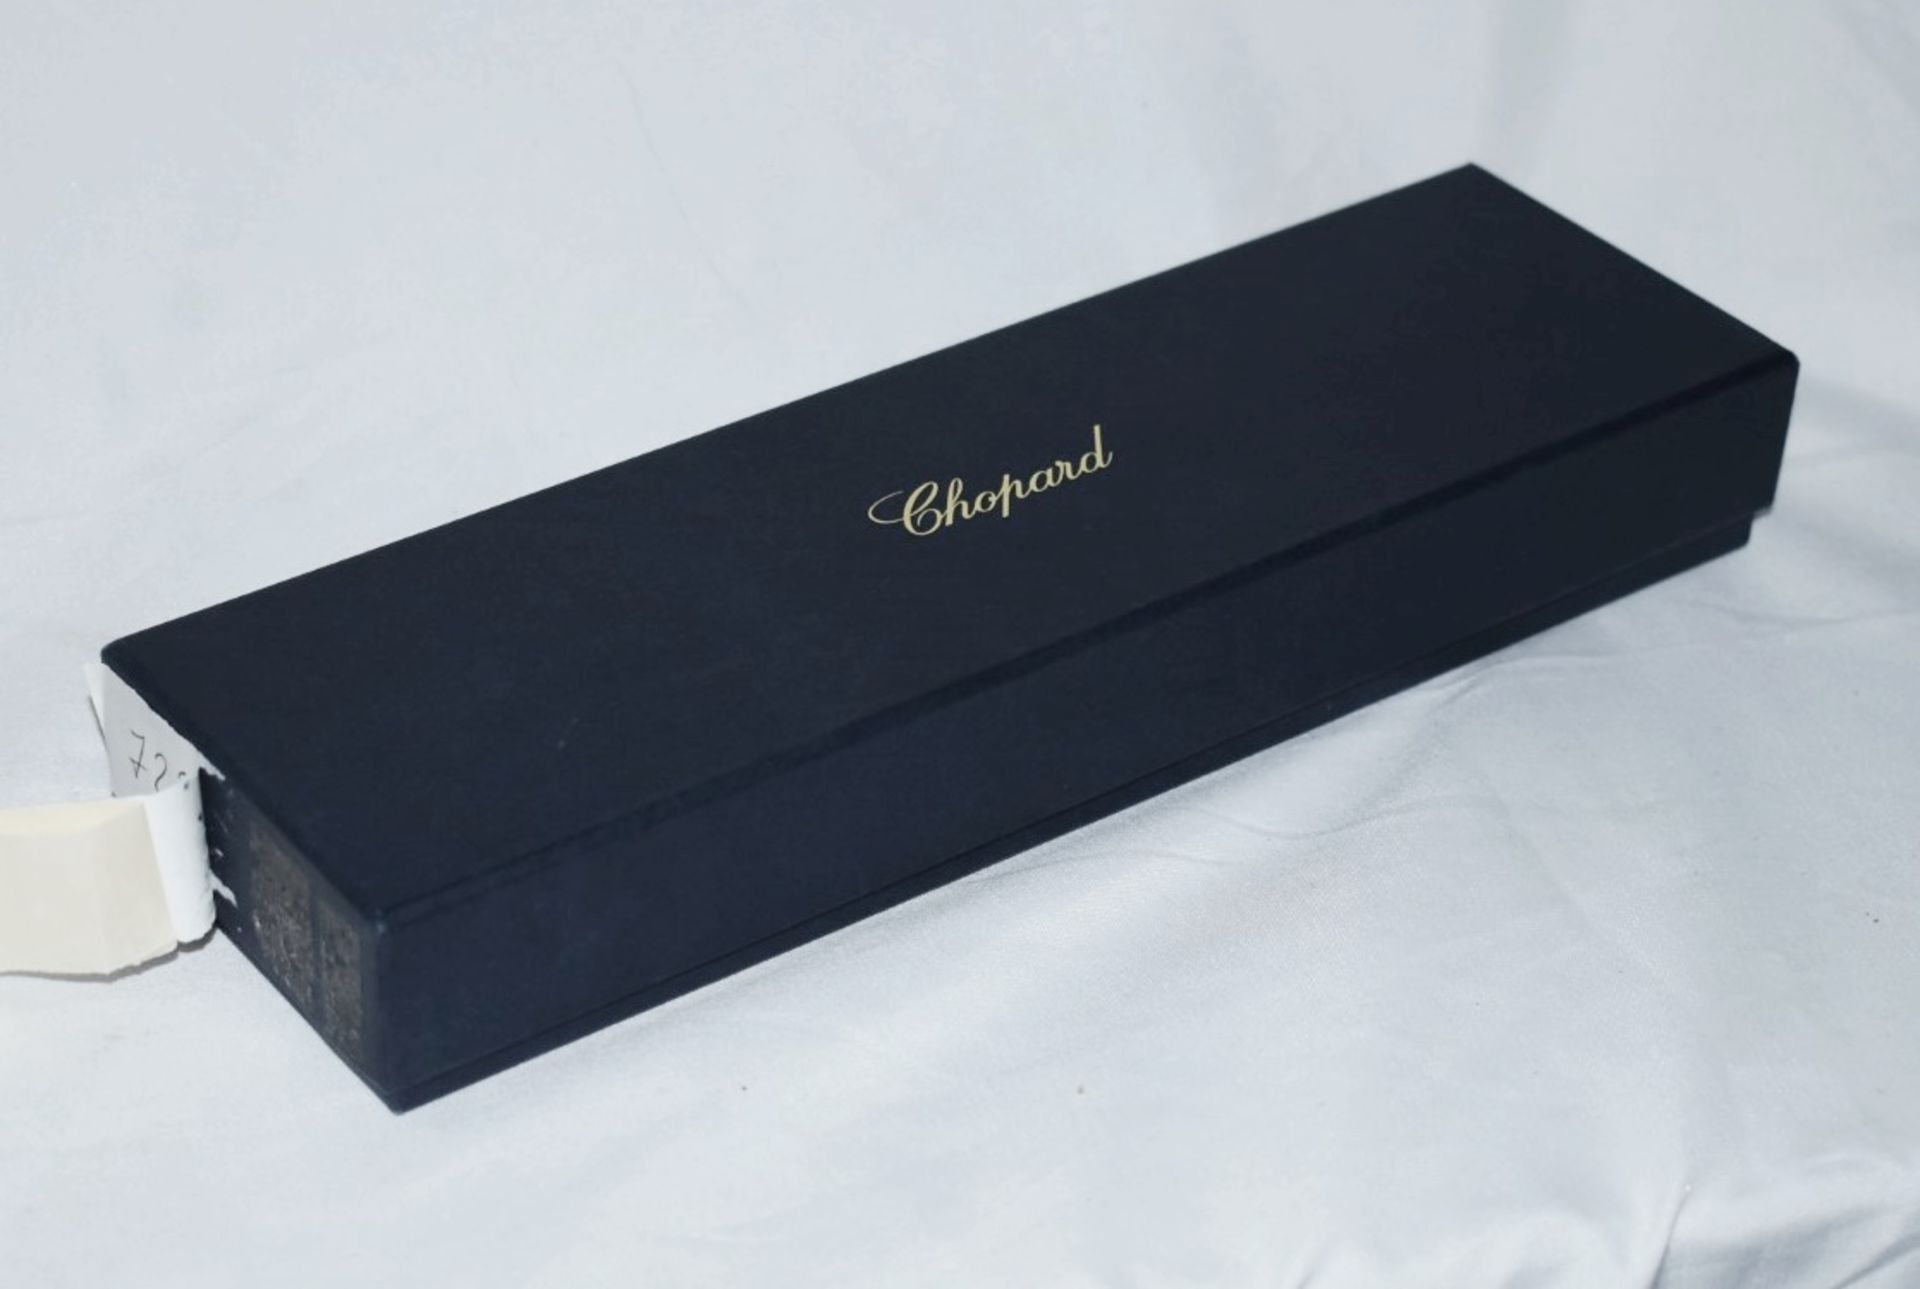 1 x CHOPARD 'Classic' Luxury Ballpoint Pen With Presentation Case, Navy Blue - Boxed Stock - - Image 11 of 11